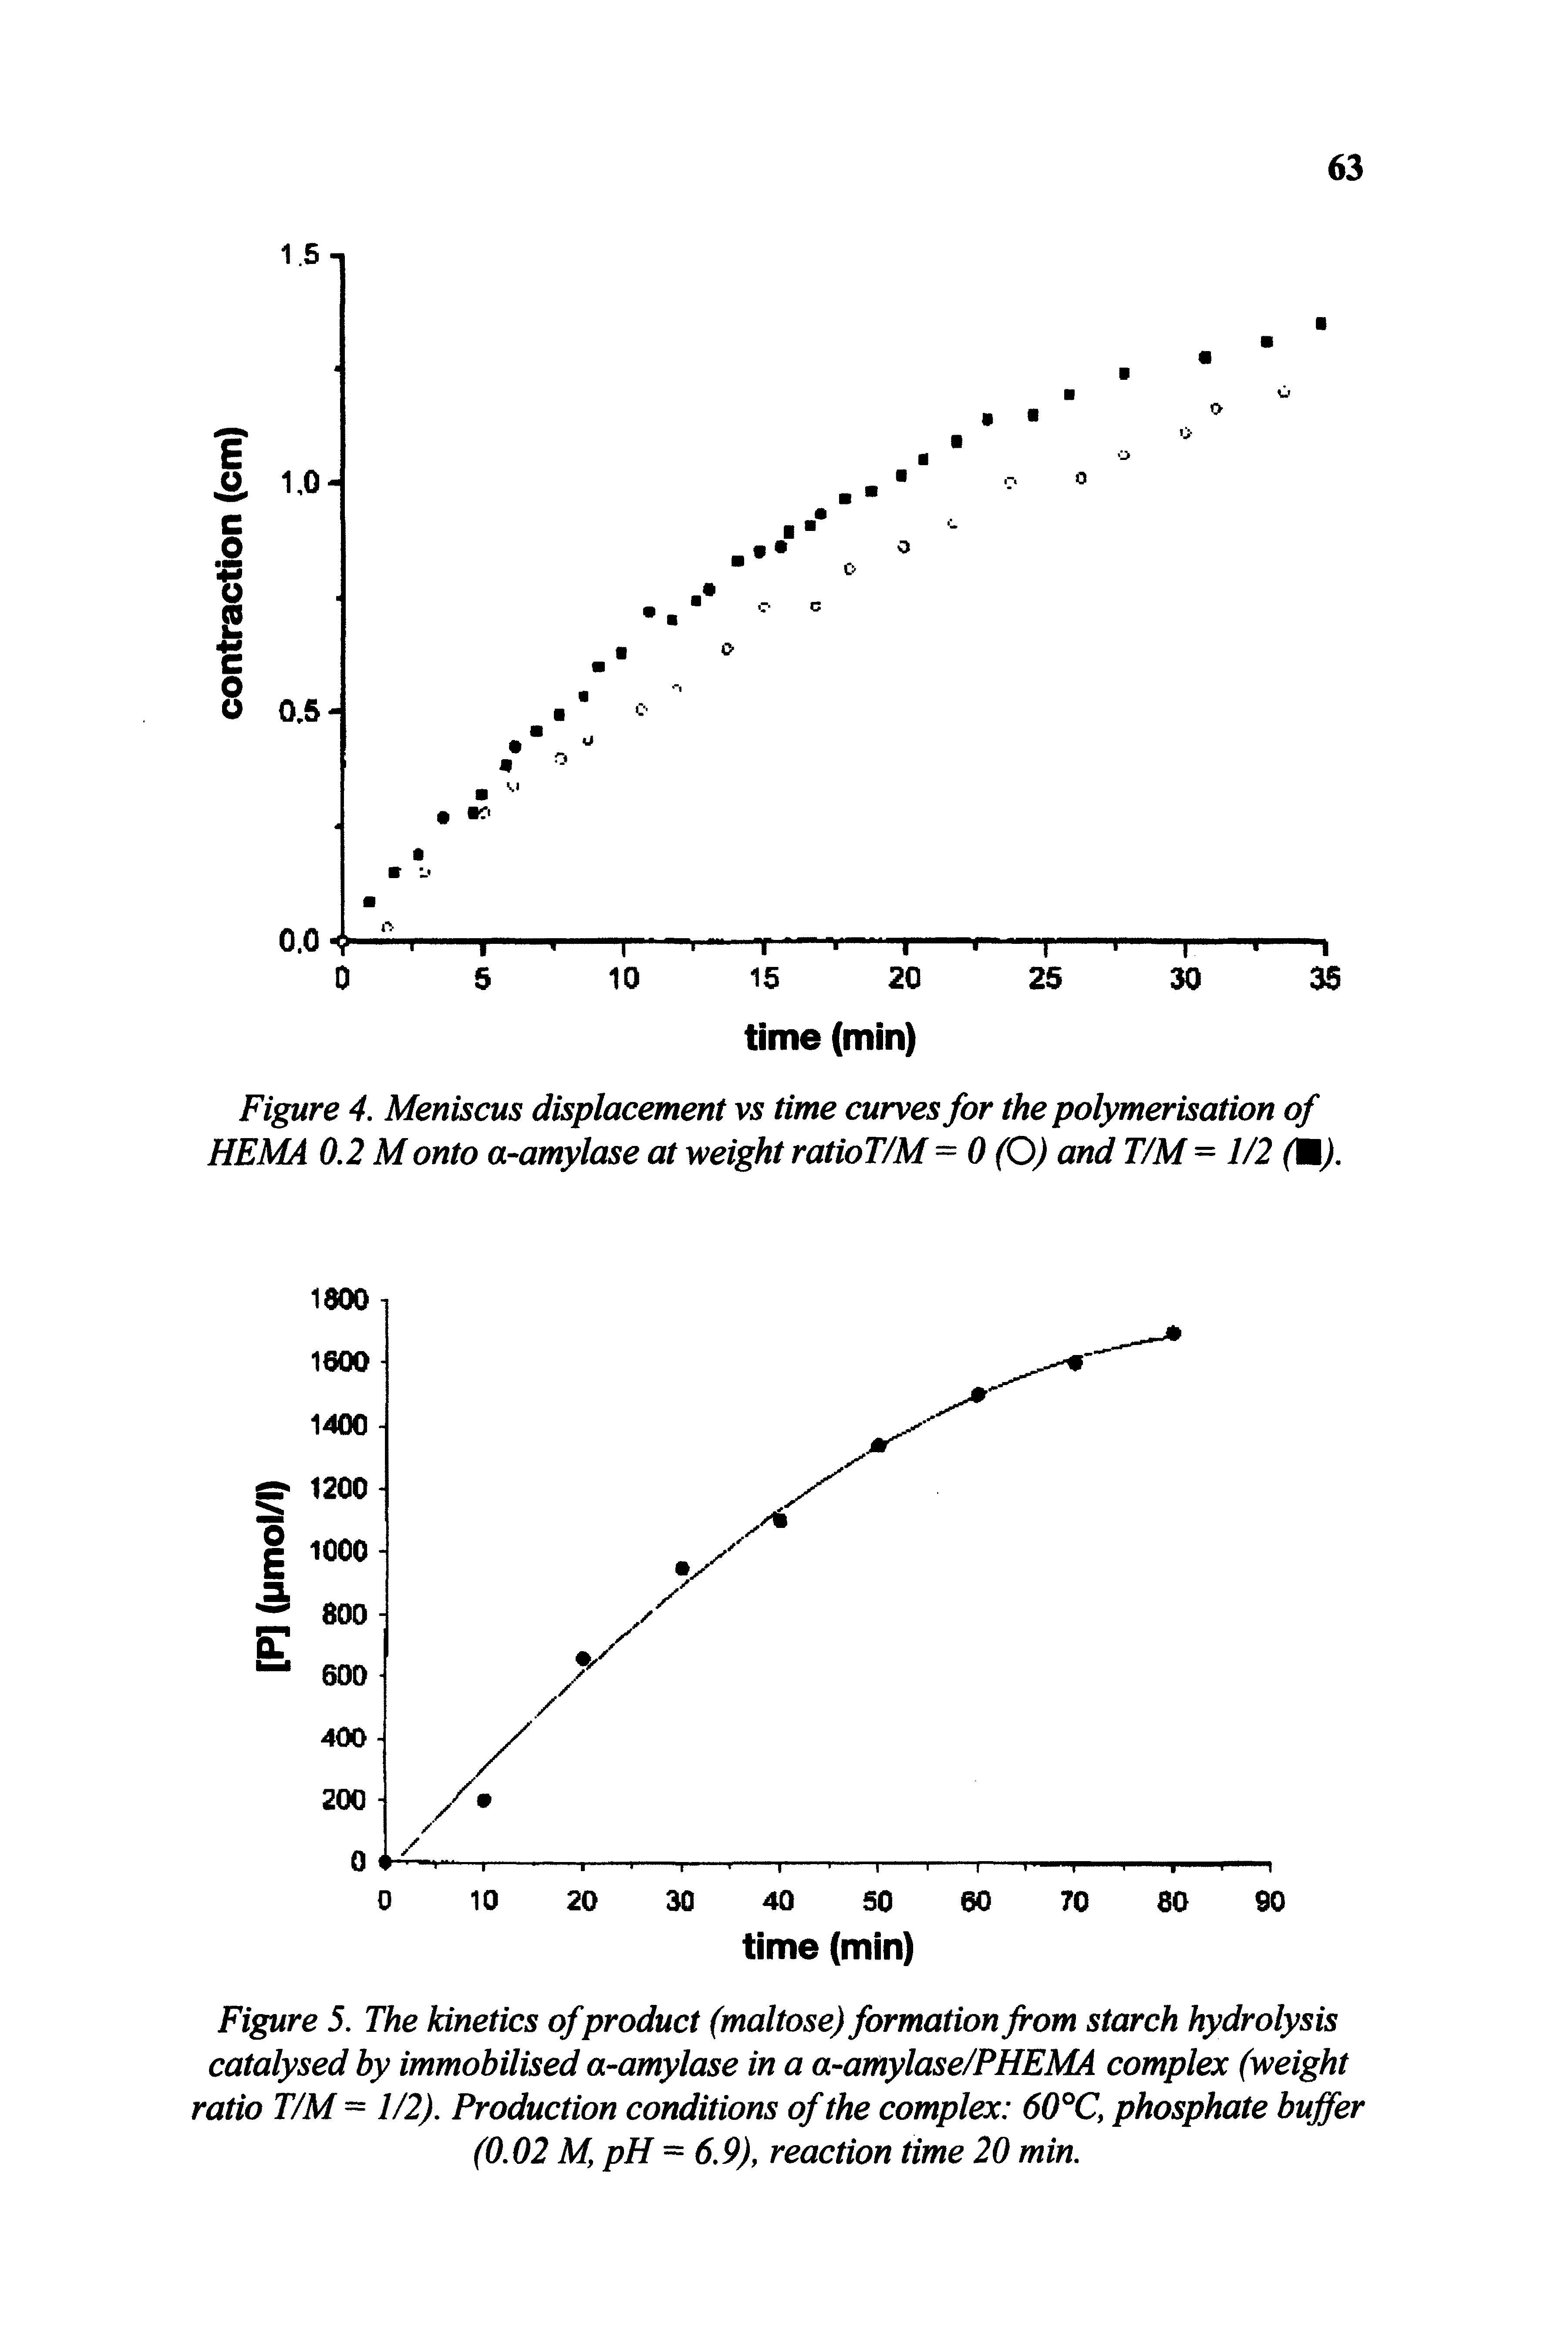 Figure 5. The kinetics of product (maltose) formation from starch hydrolysis catalysed by immobilised a-amylase in a a-amylase/PHEMA complex (weight ratio T/M - 1/2). Production conditions of the complex 60 C, phosphate buffer (0.02 M, pH = 6.9), reaction time 20 min.